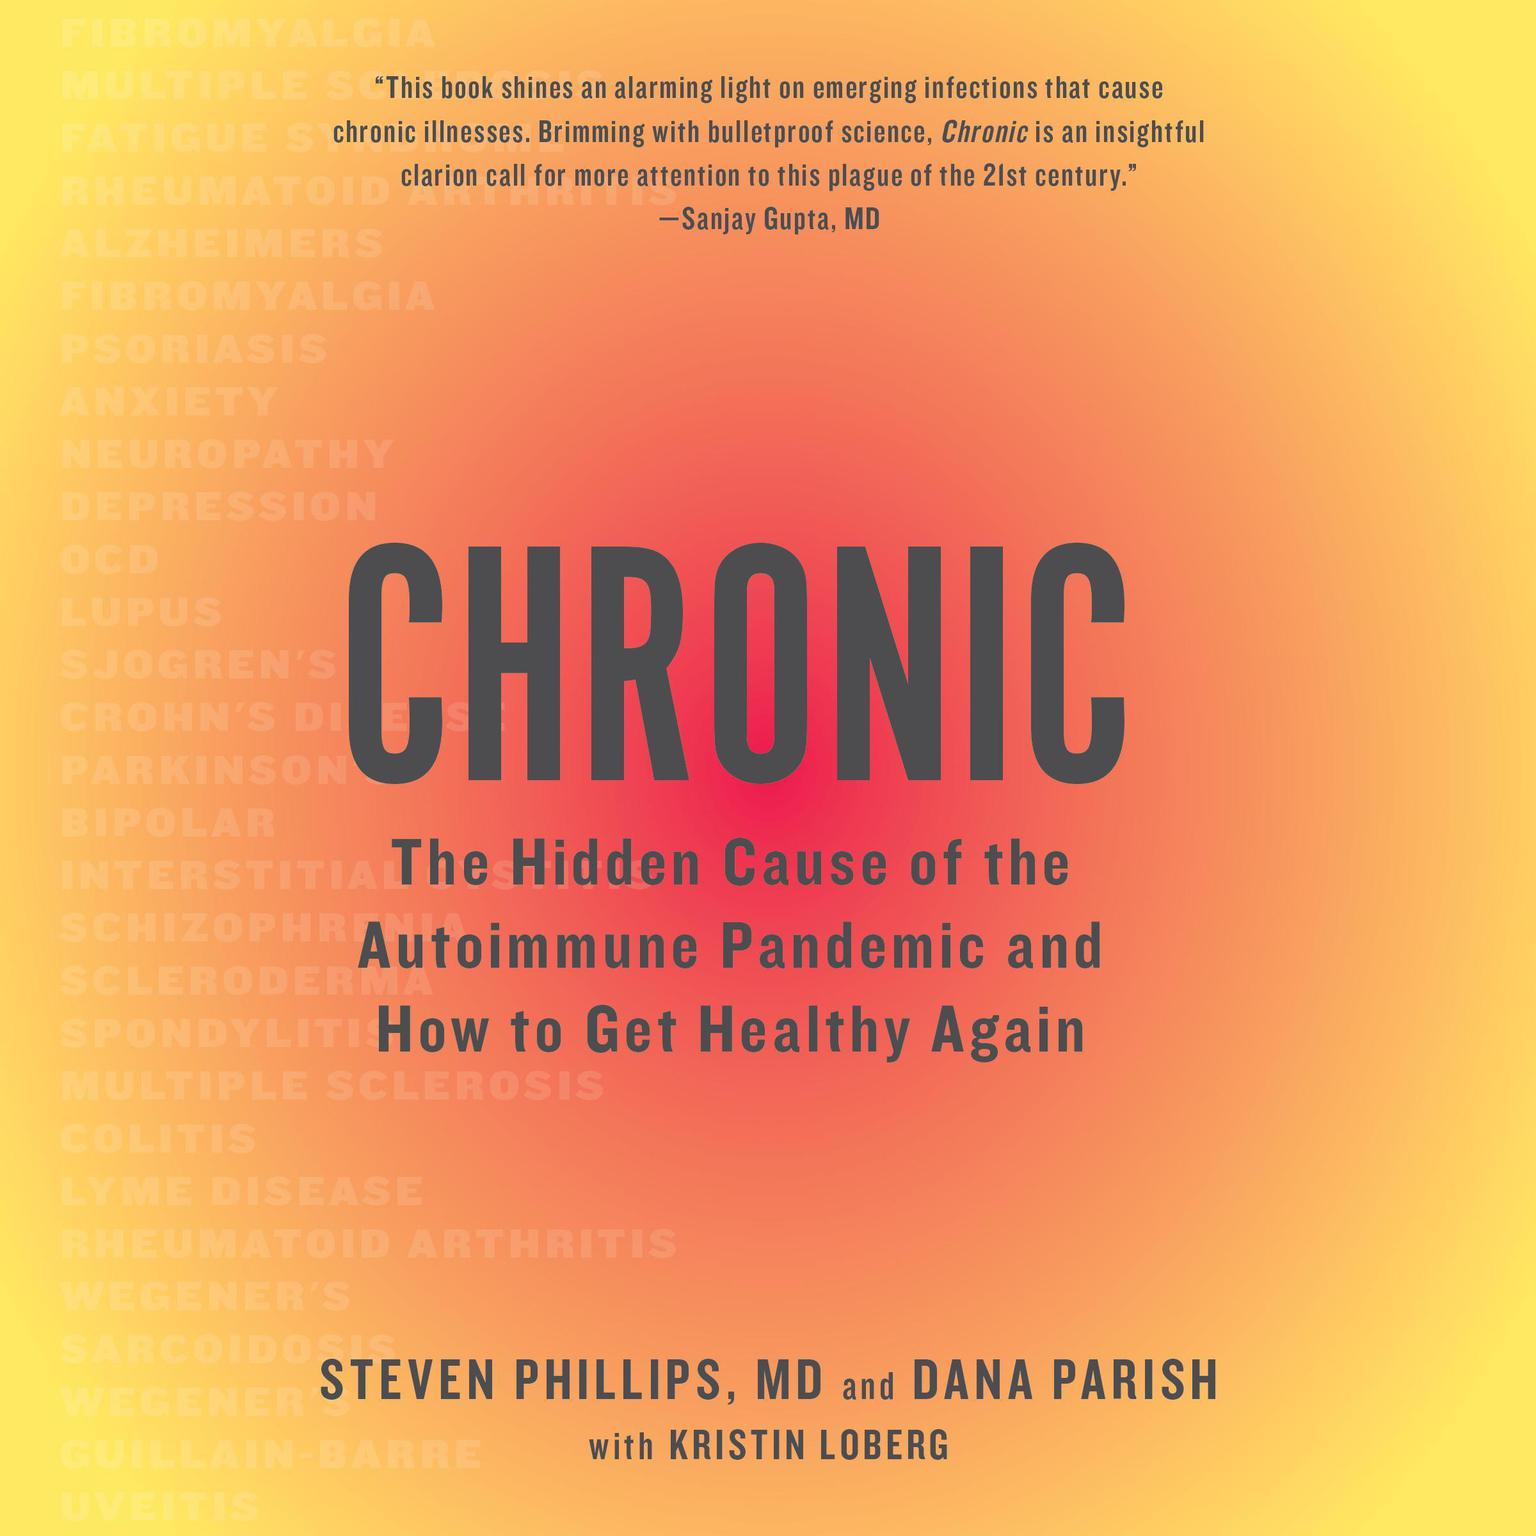 Chronic: The Hidden Cause of the Autoimmune Pandemic and How to Get Healthy Again Audiobook, by Steven Phillips